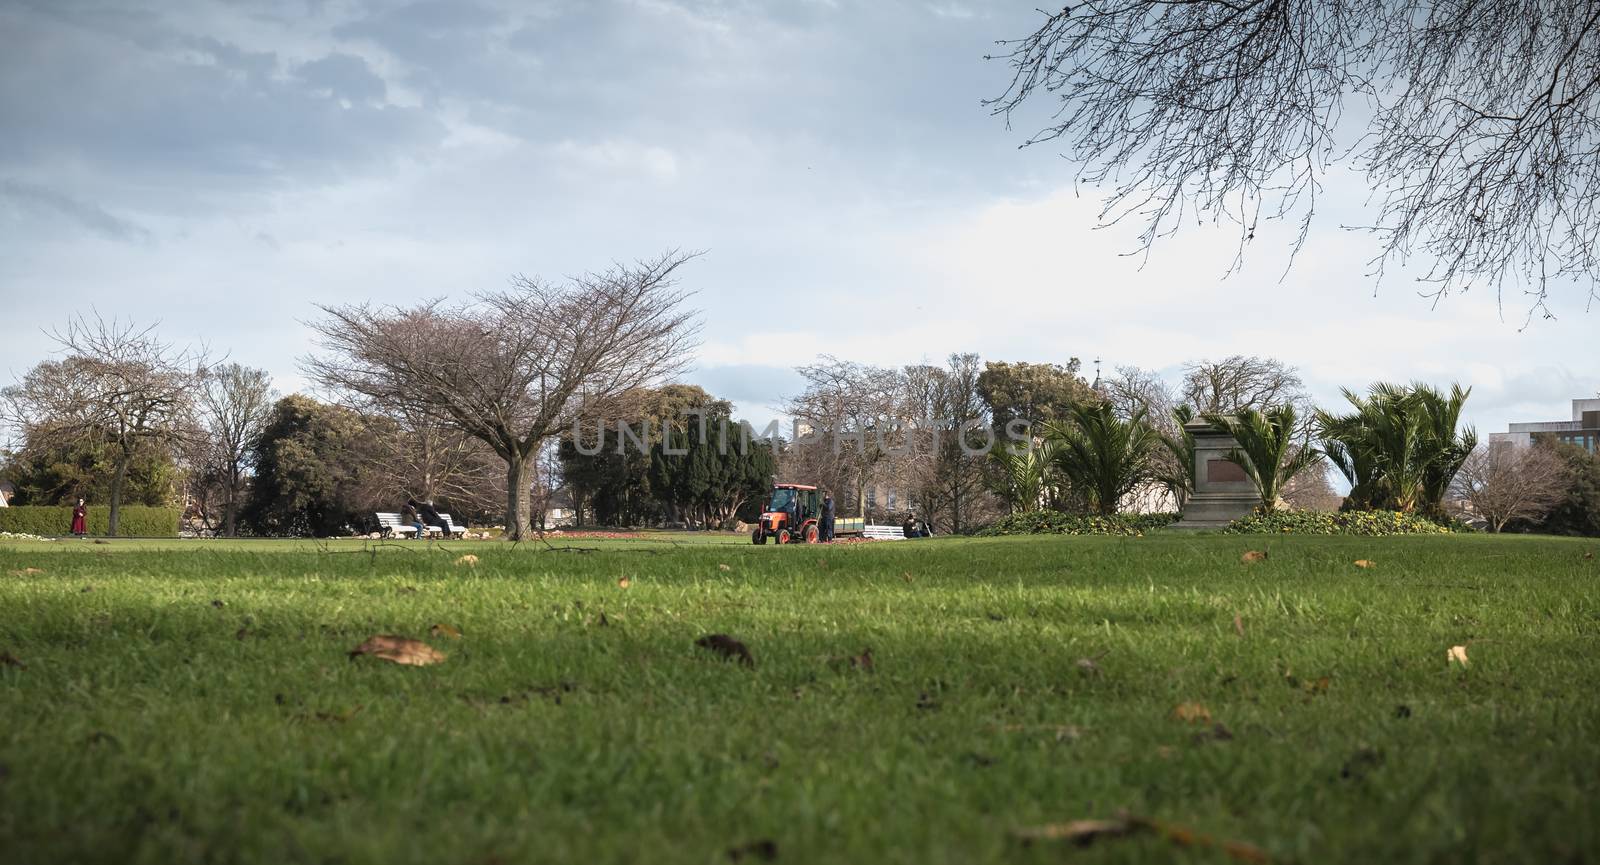 Dublin, Ireland - February 13, 2019: Gardeners moving by tractor on the lawns of Phoenix Park near the historic city center on a winter day